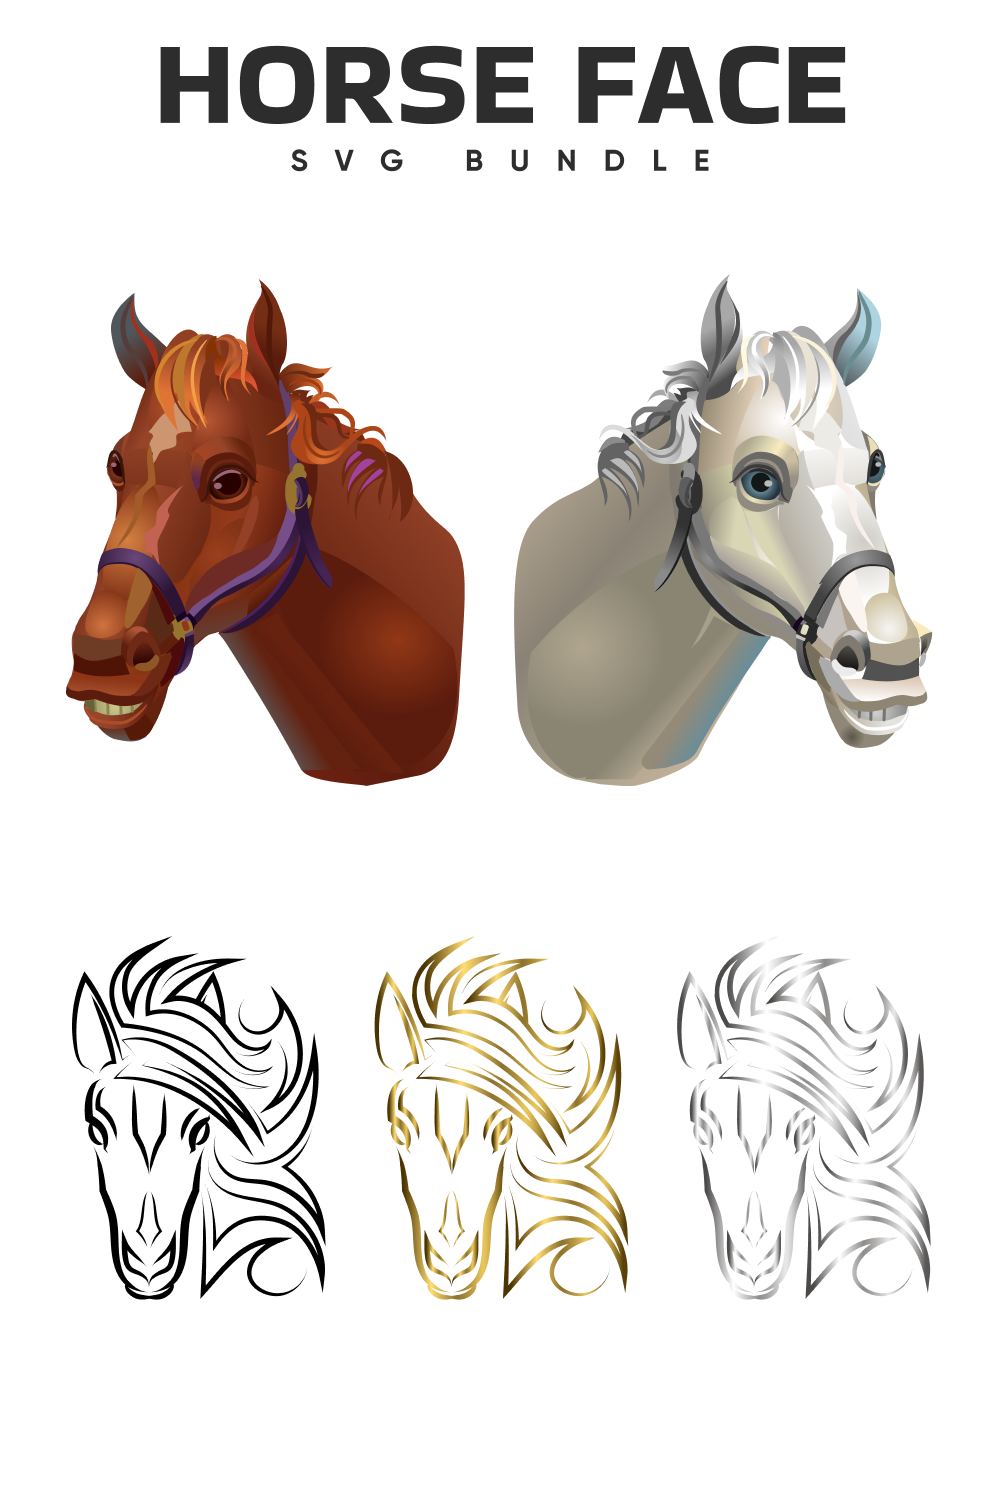 The horse face is shown in three different colors.